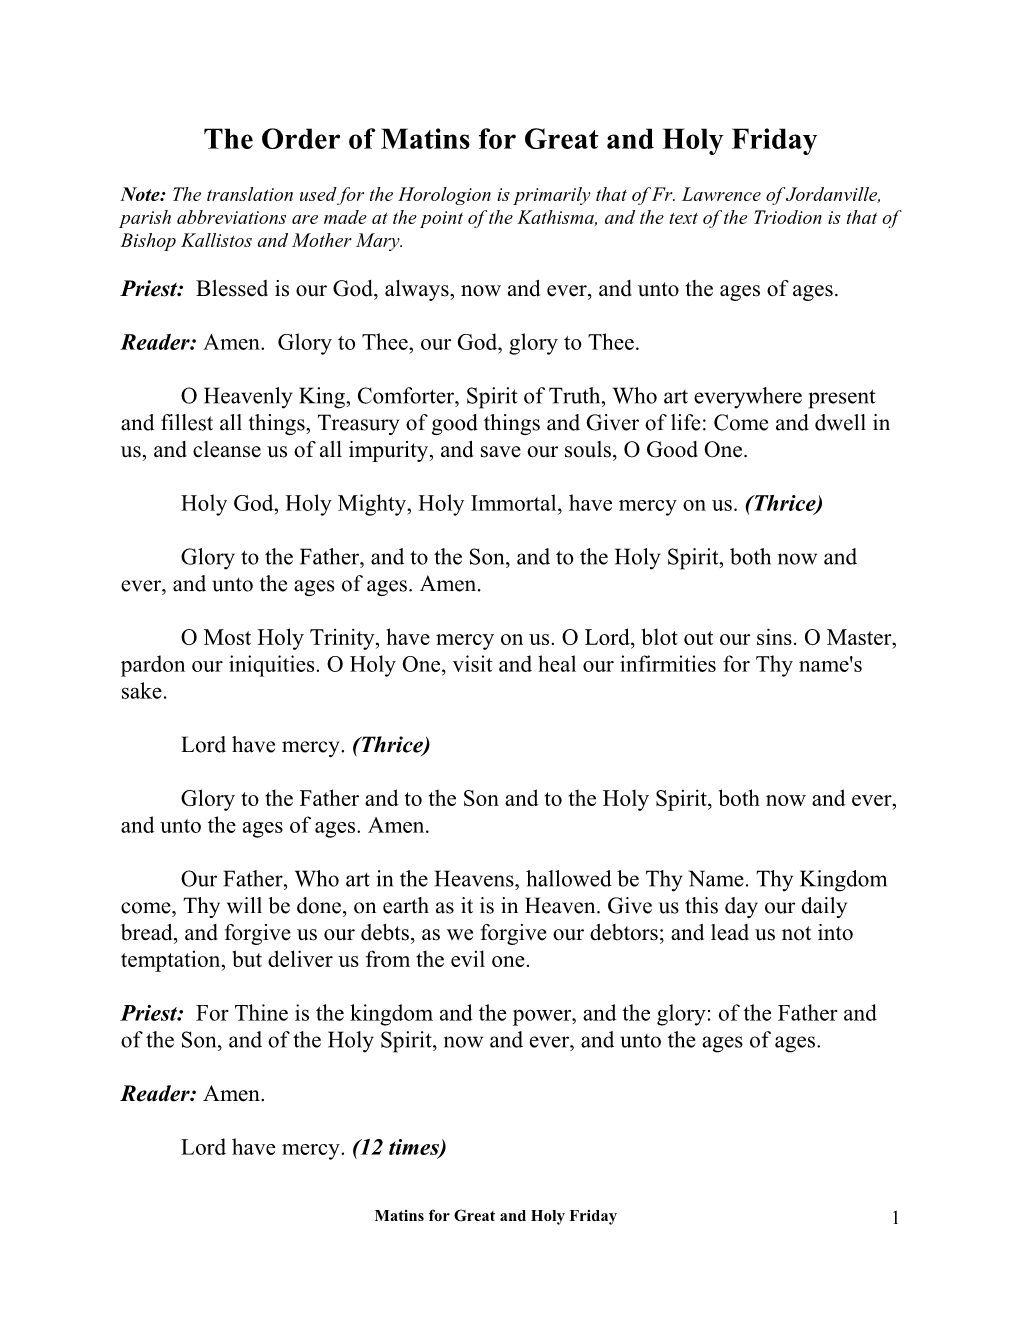 The Order of Matins for Great and Holy Friday